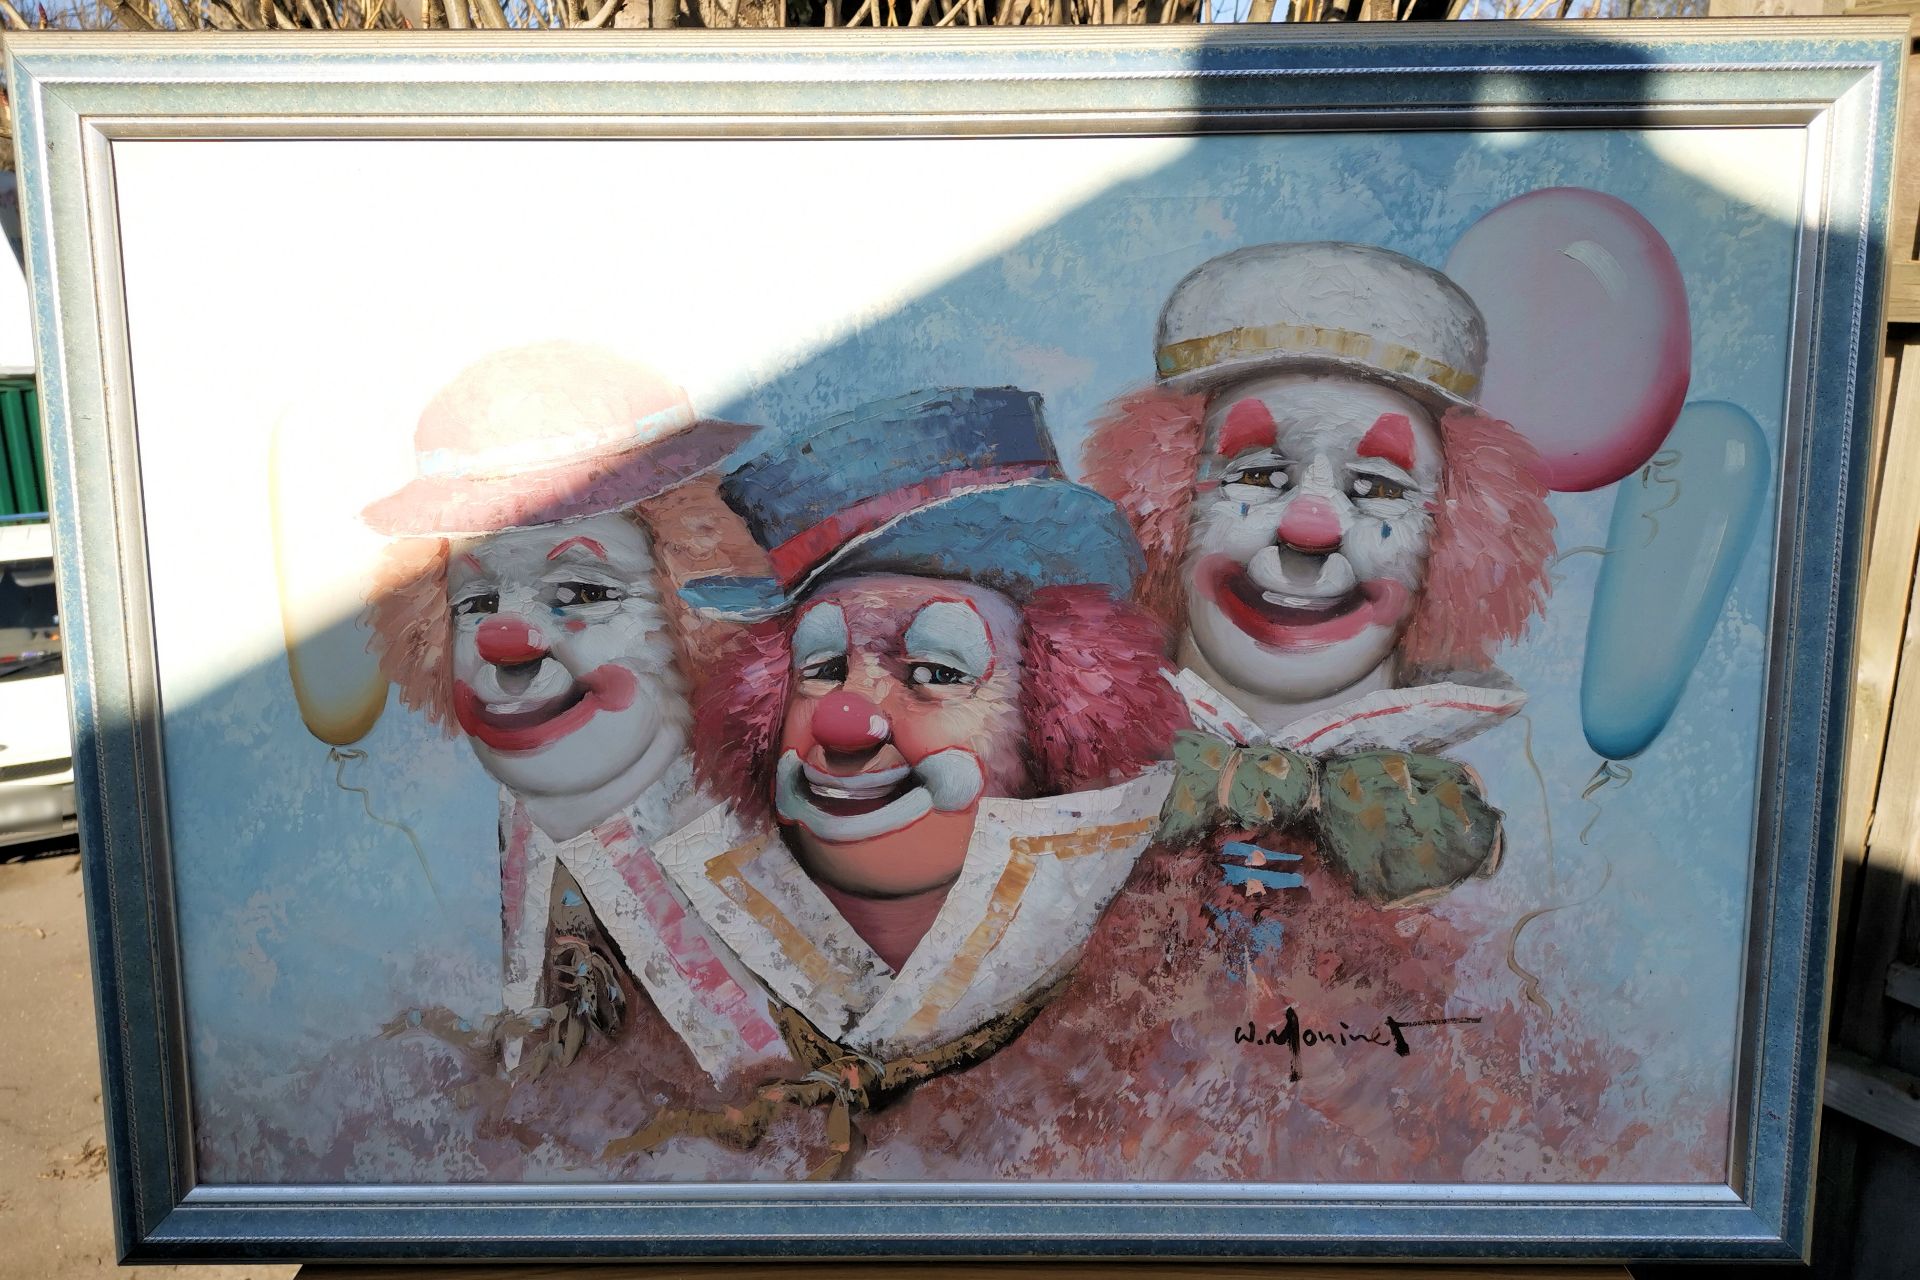 1 x Clown Oil Painting by W Moninet - Dimensions: 1020 x720 mm - CL355 - Location: Great Yarmouth